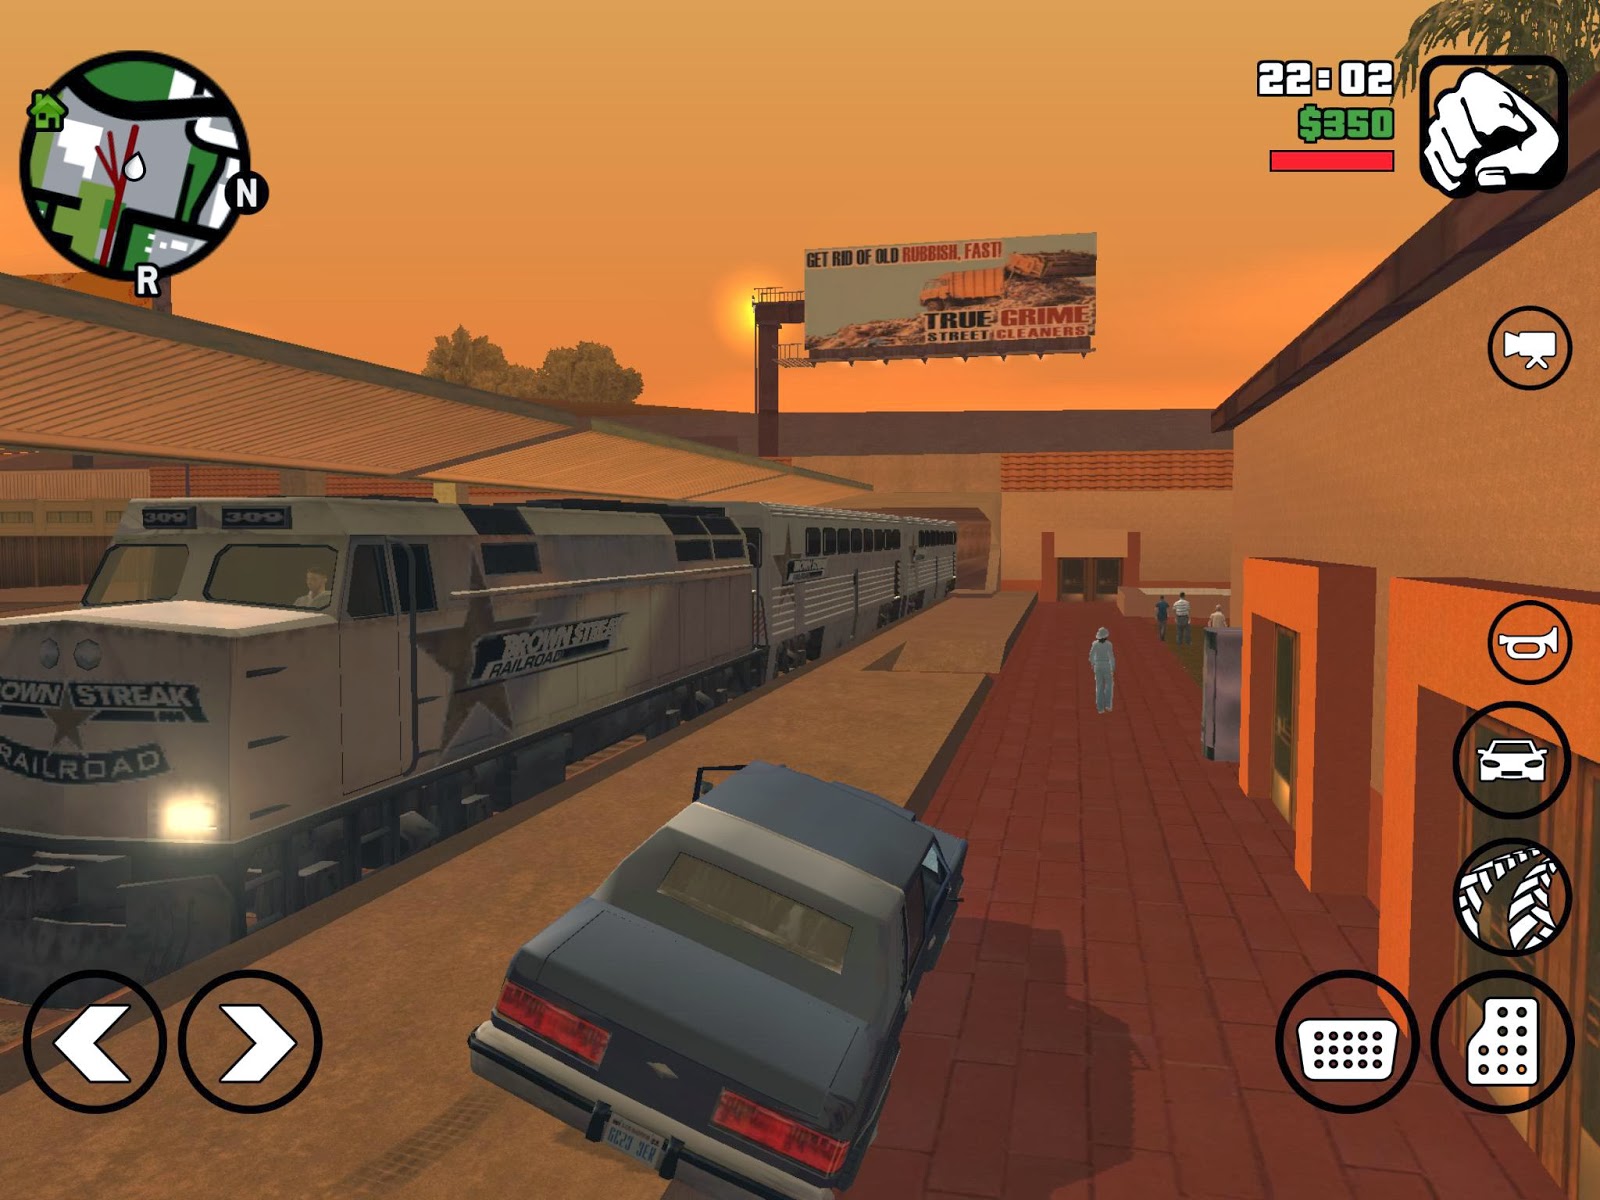 gta san andreas apk download for android 5.1.1